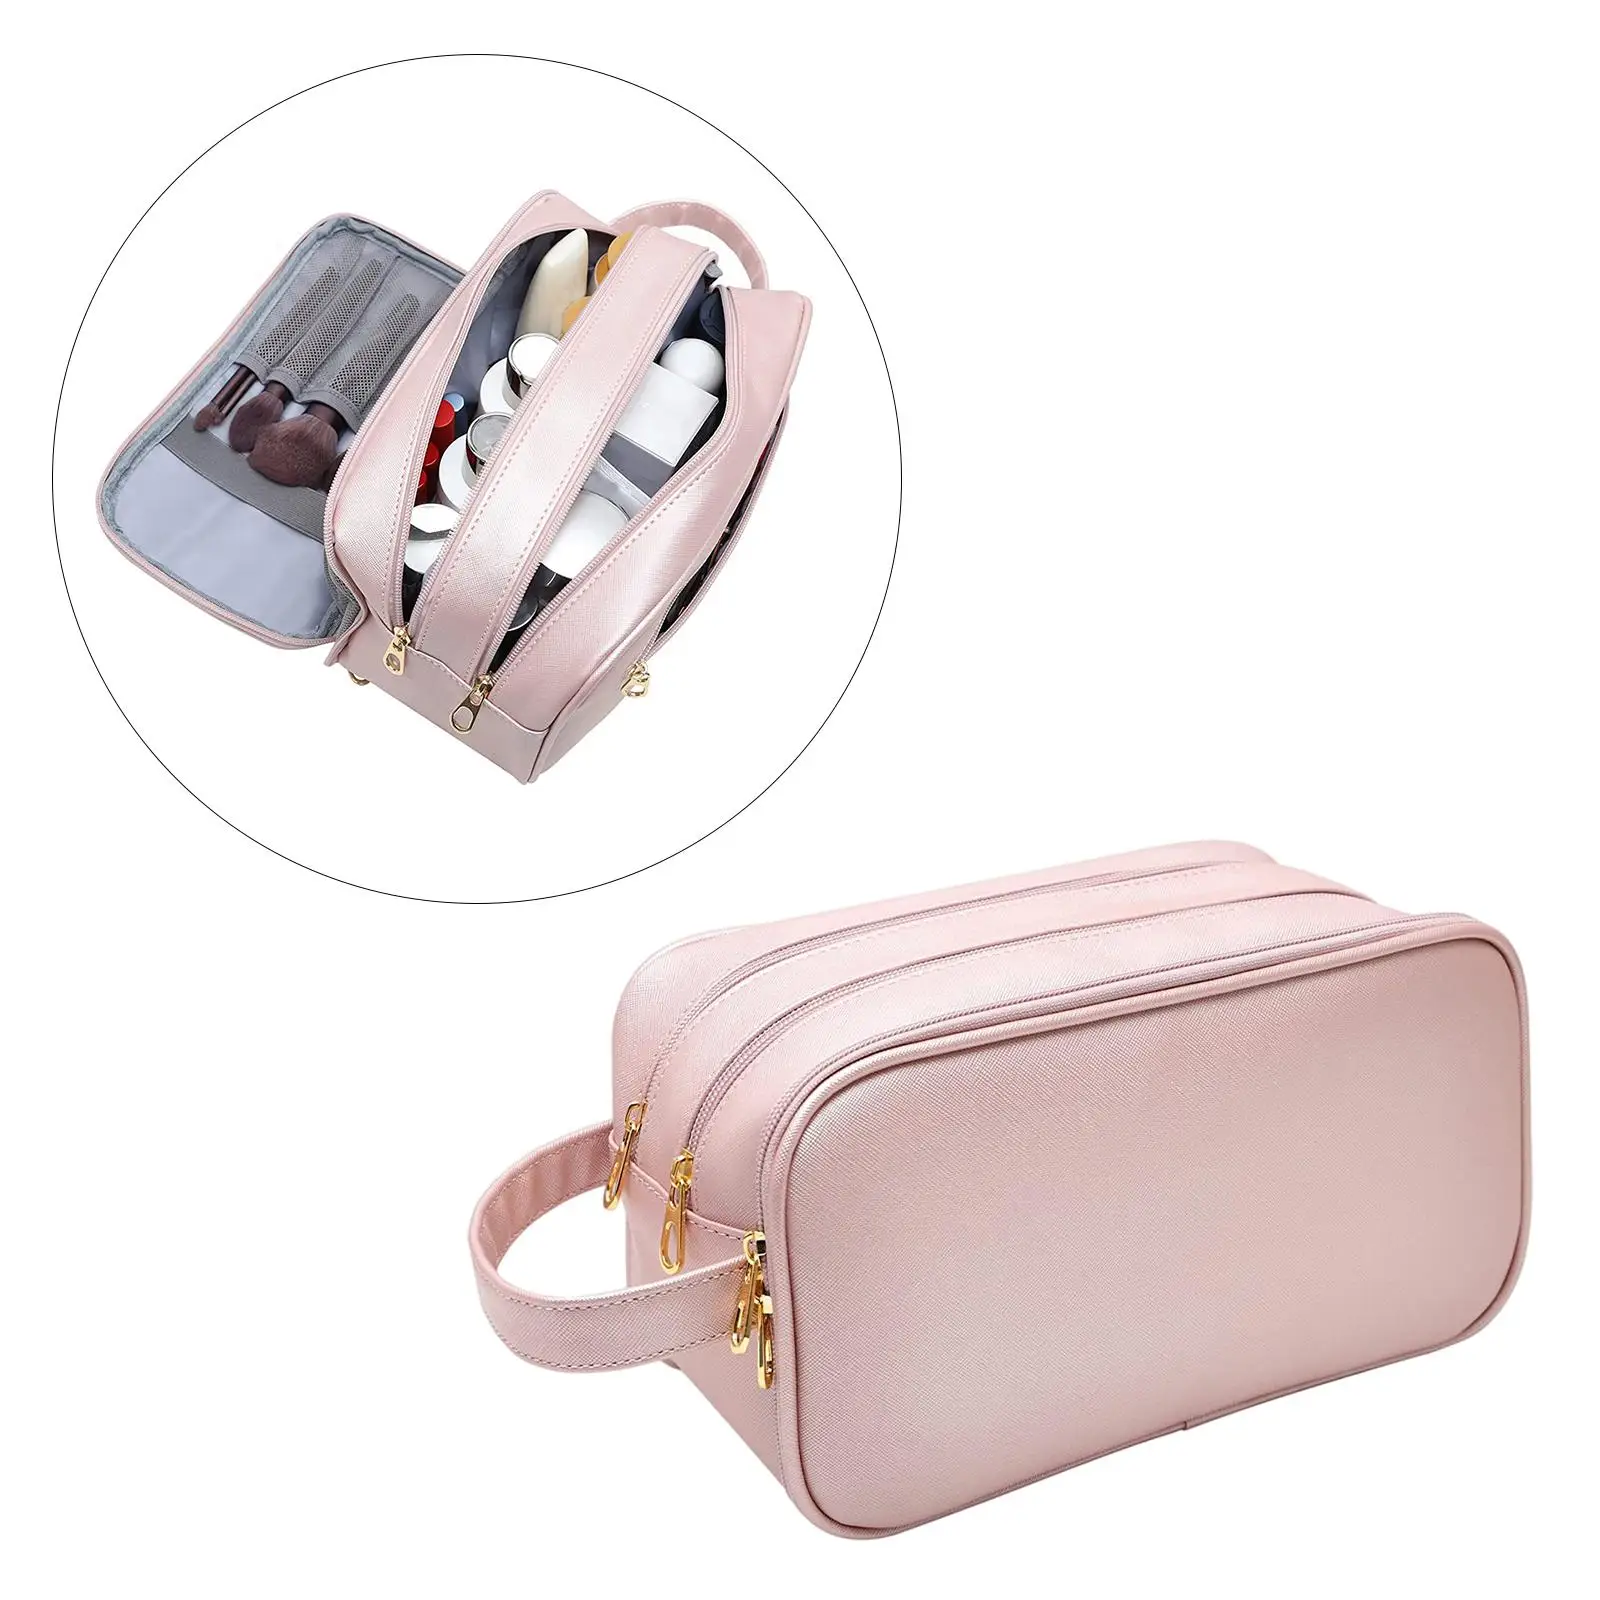 Water Resistant PU Leather Toiletry Bag Dorm Essentials Travel Makeup Bag for Accessories Business for Women Men Bathroom Pink